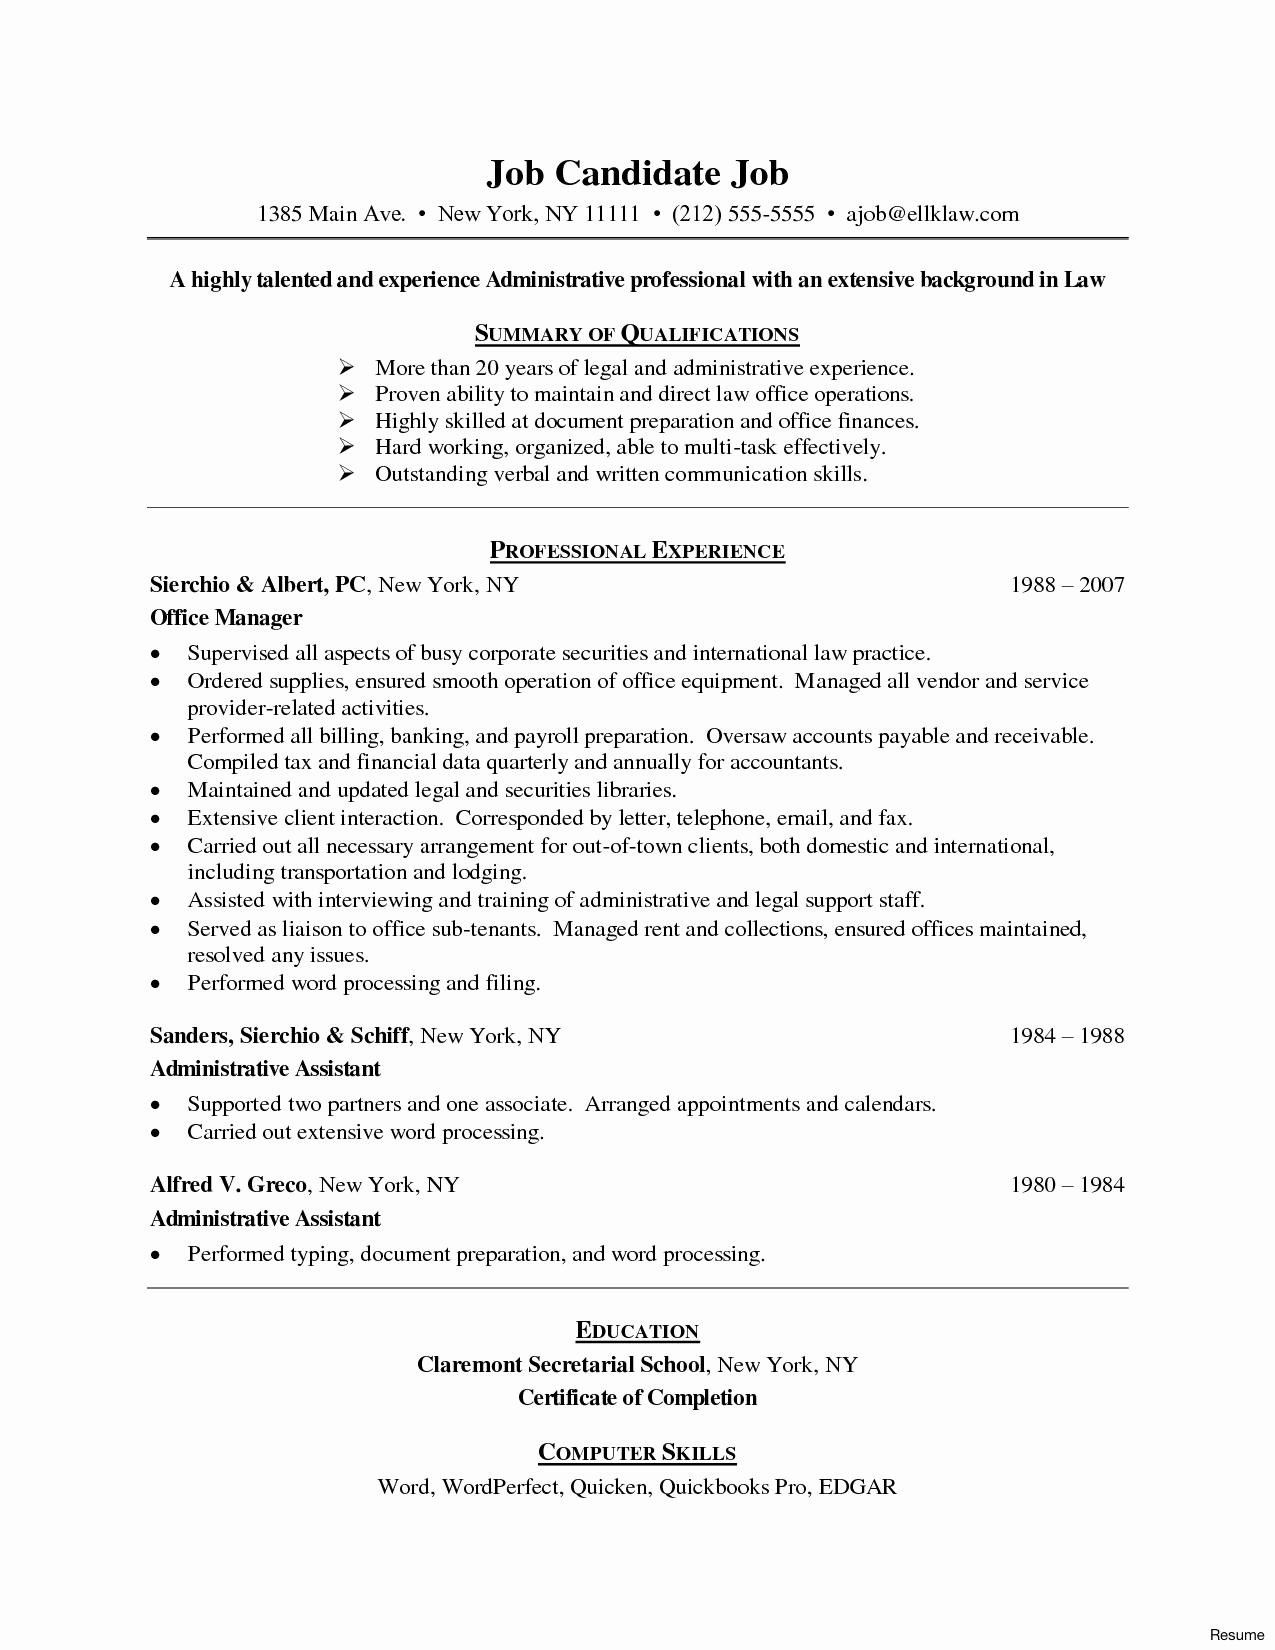 Resume Format 20 Years Experience